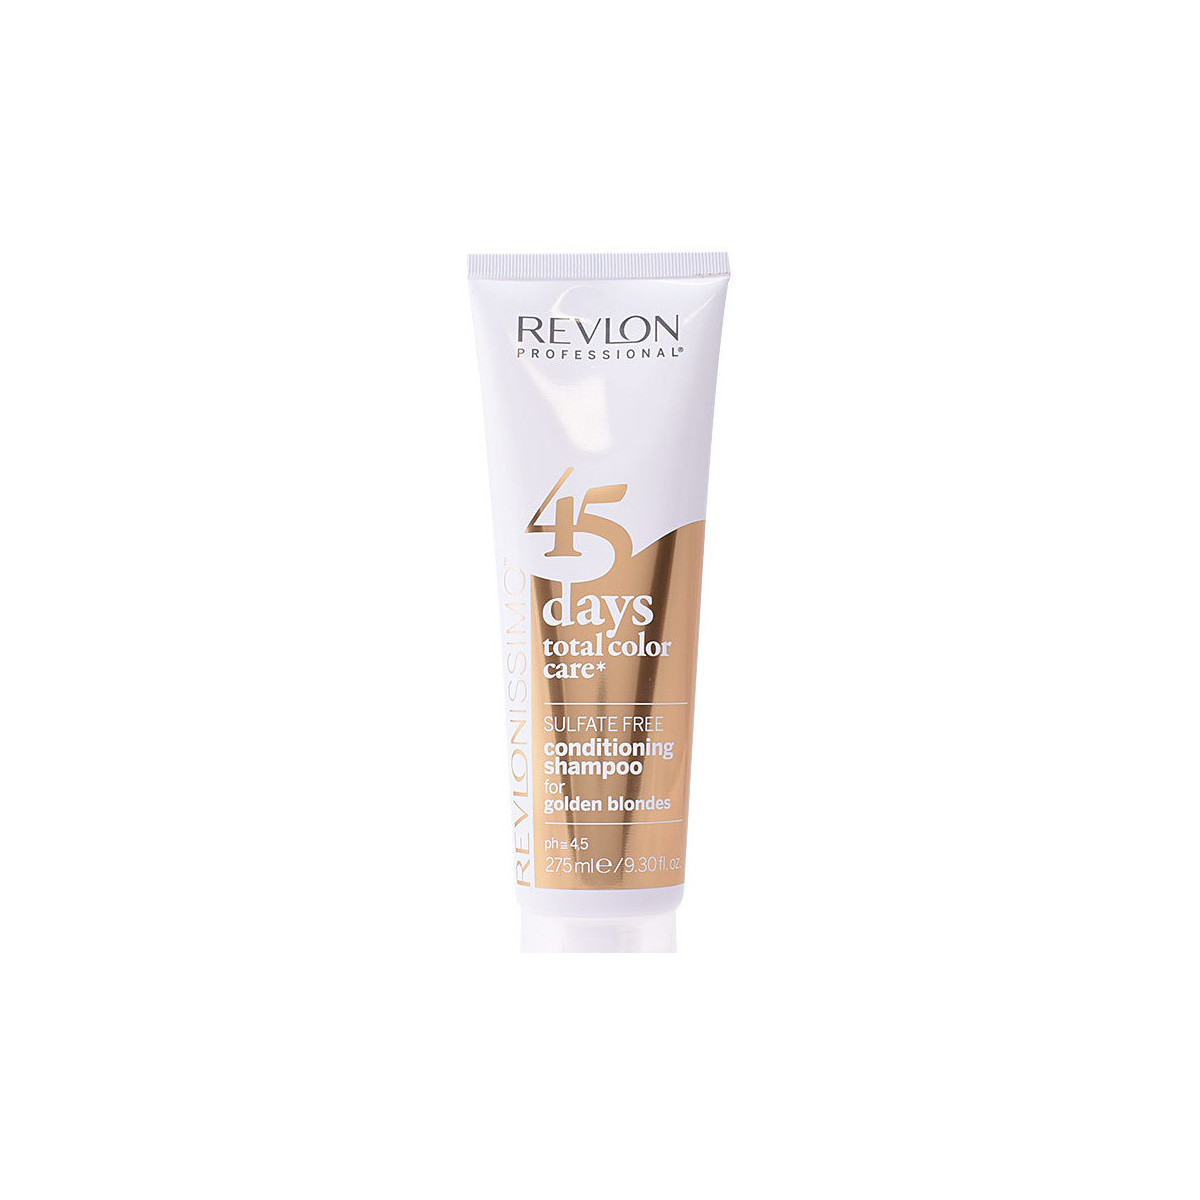 Beauty Shampoo Revlon 45 Days Conditioning Shampoo For Golden Blondes 